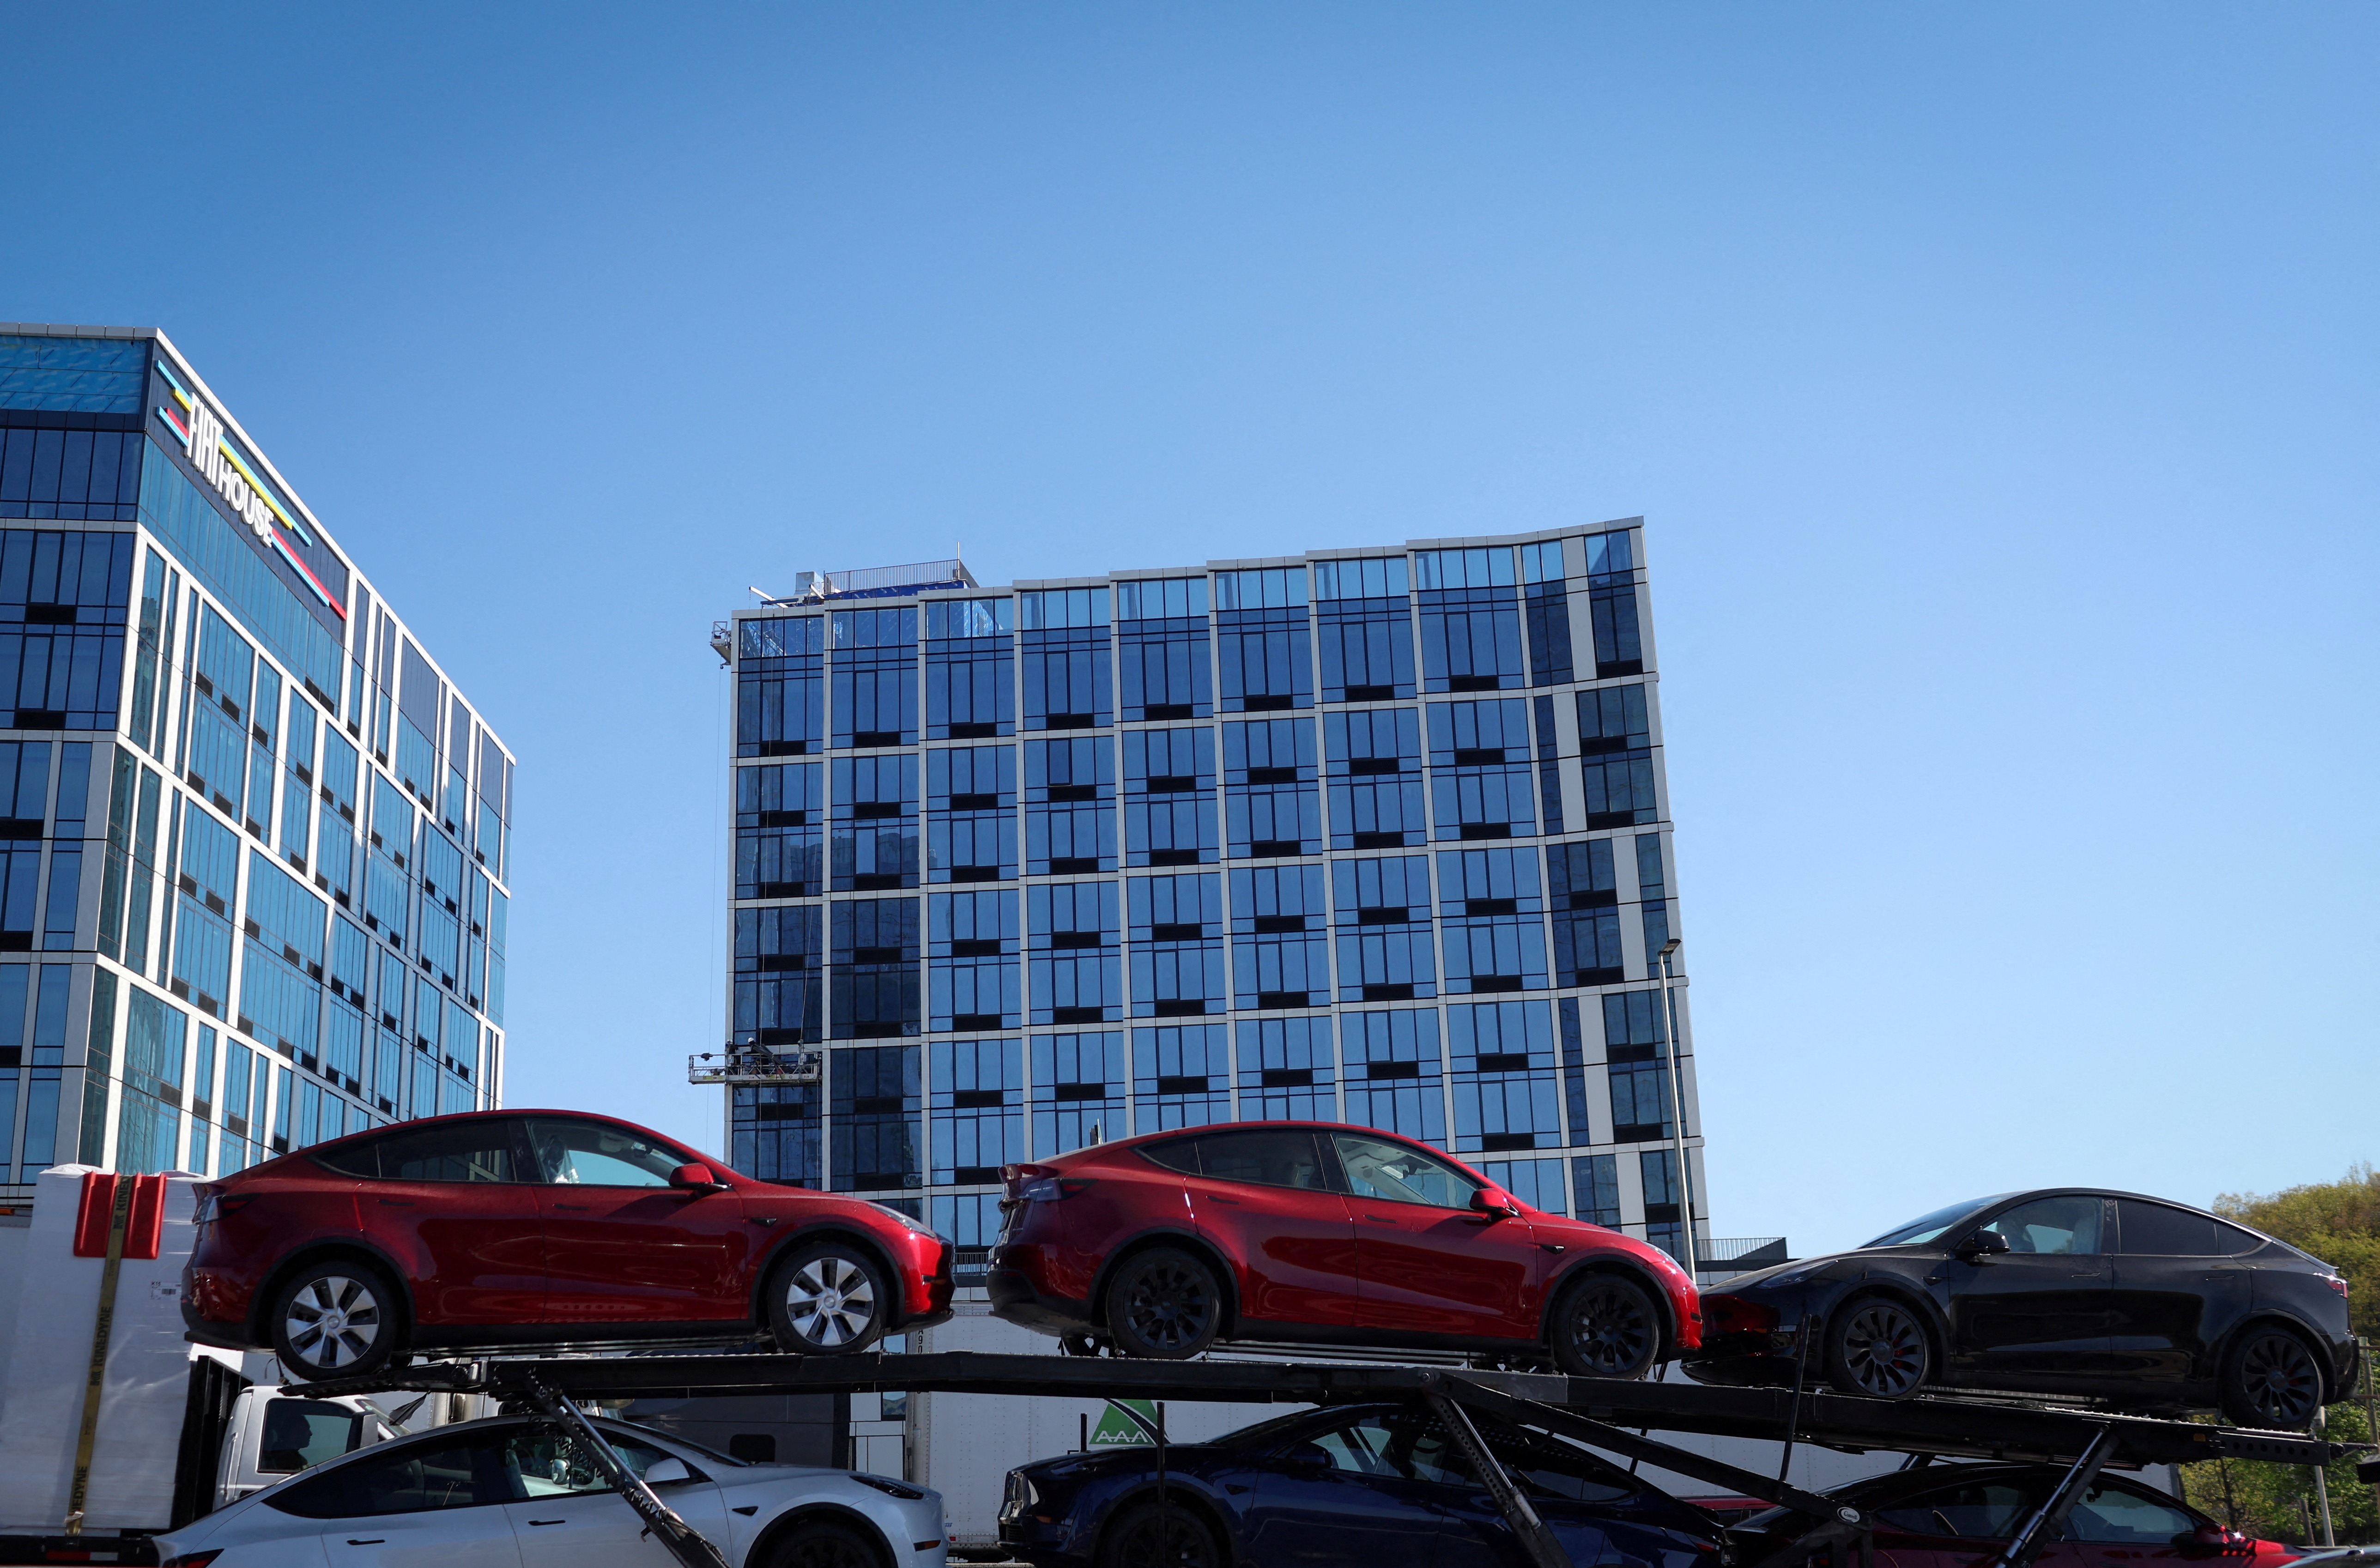 New Tesla vehicles are loaded on a car carrier in New York